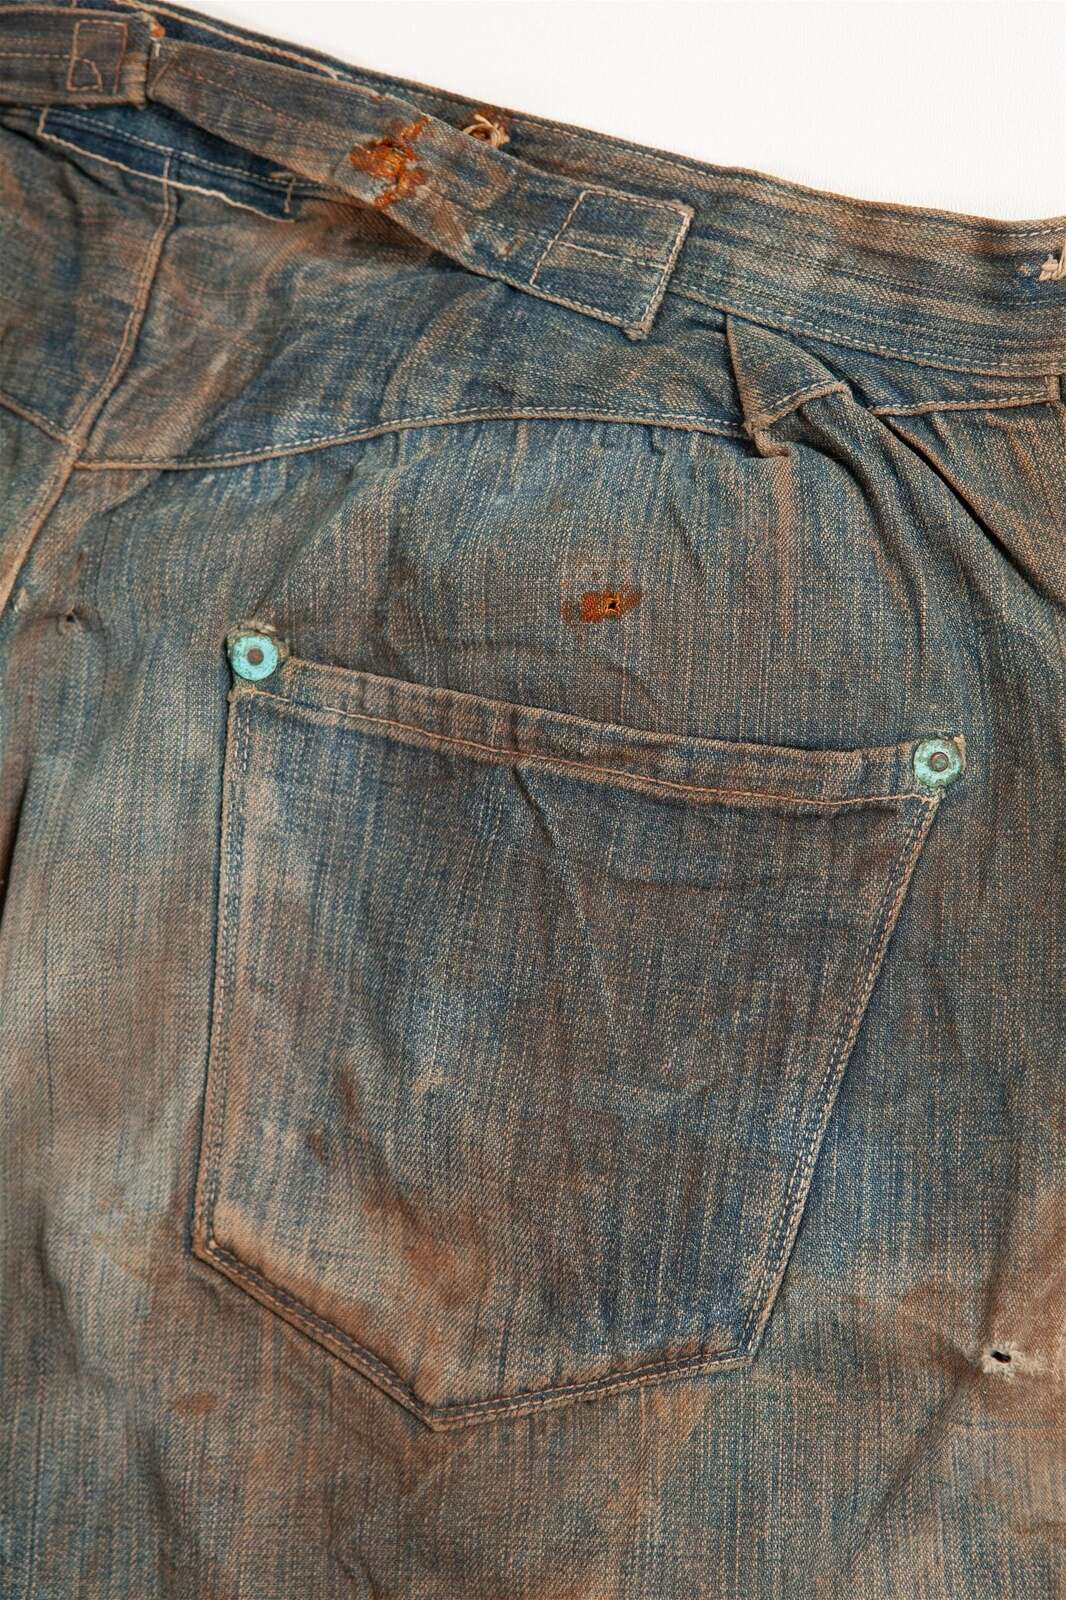 Durango Levi's collector to auction off 'oldest' pair of jeans